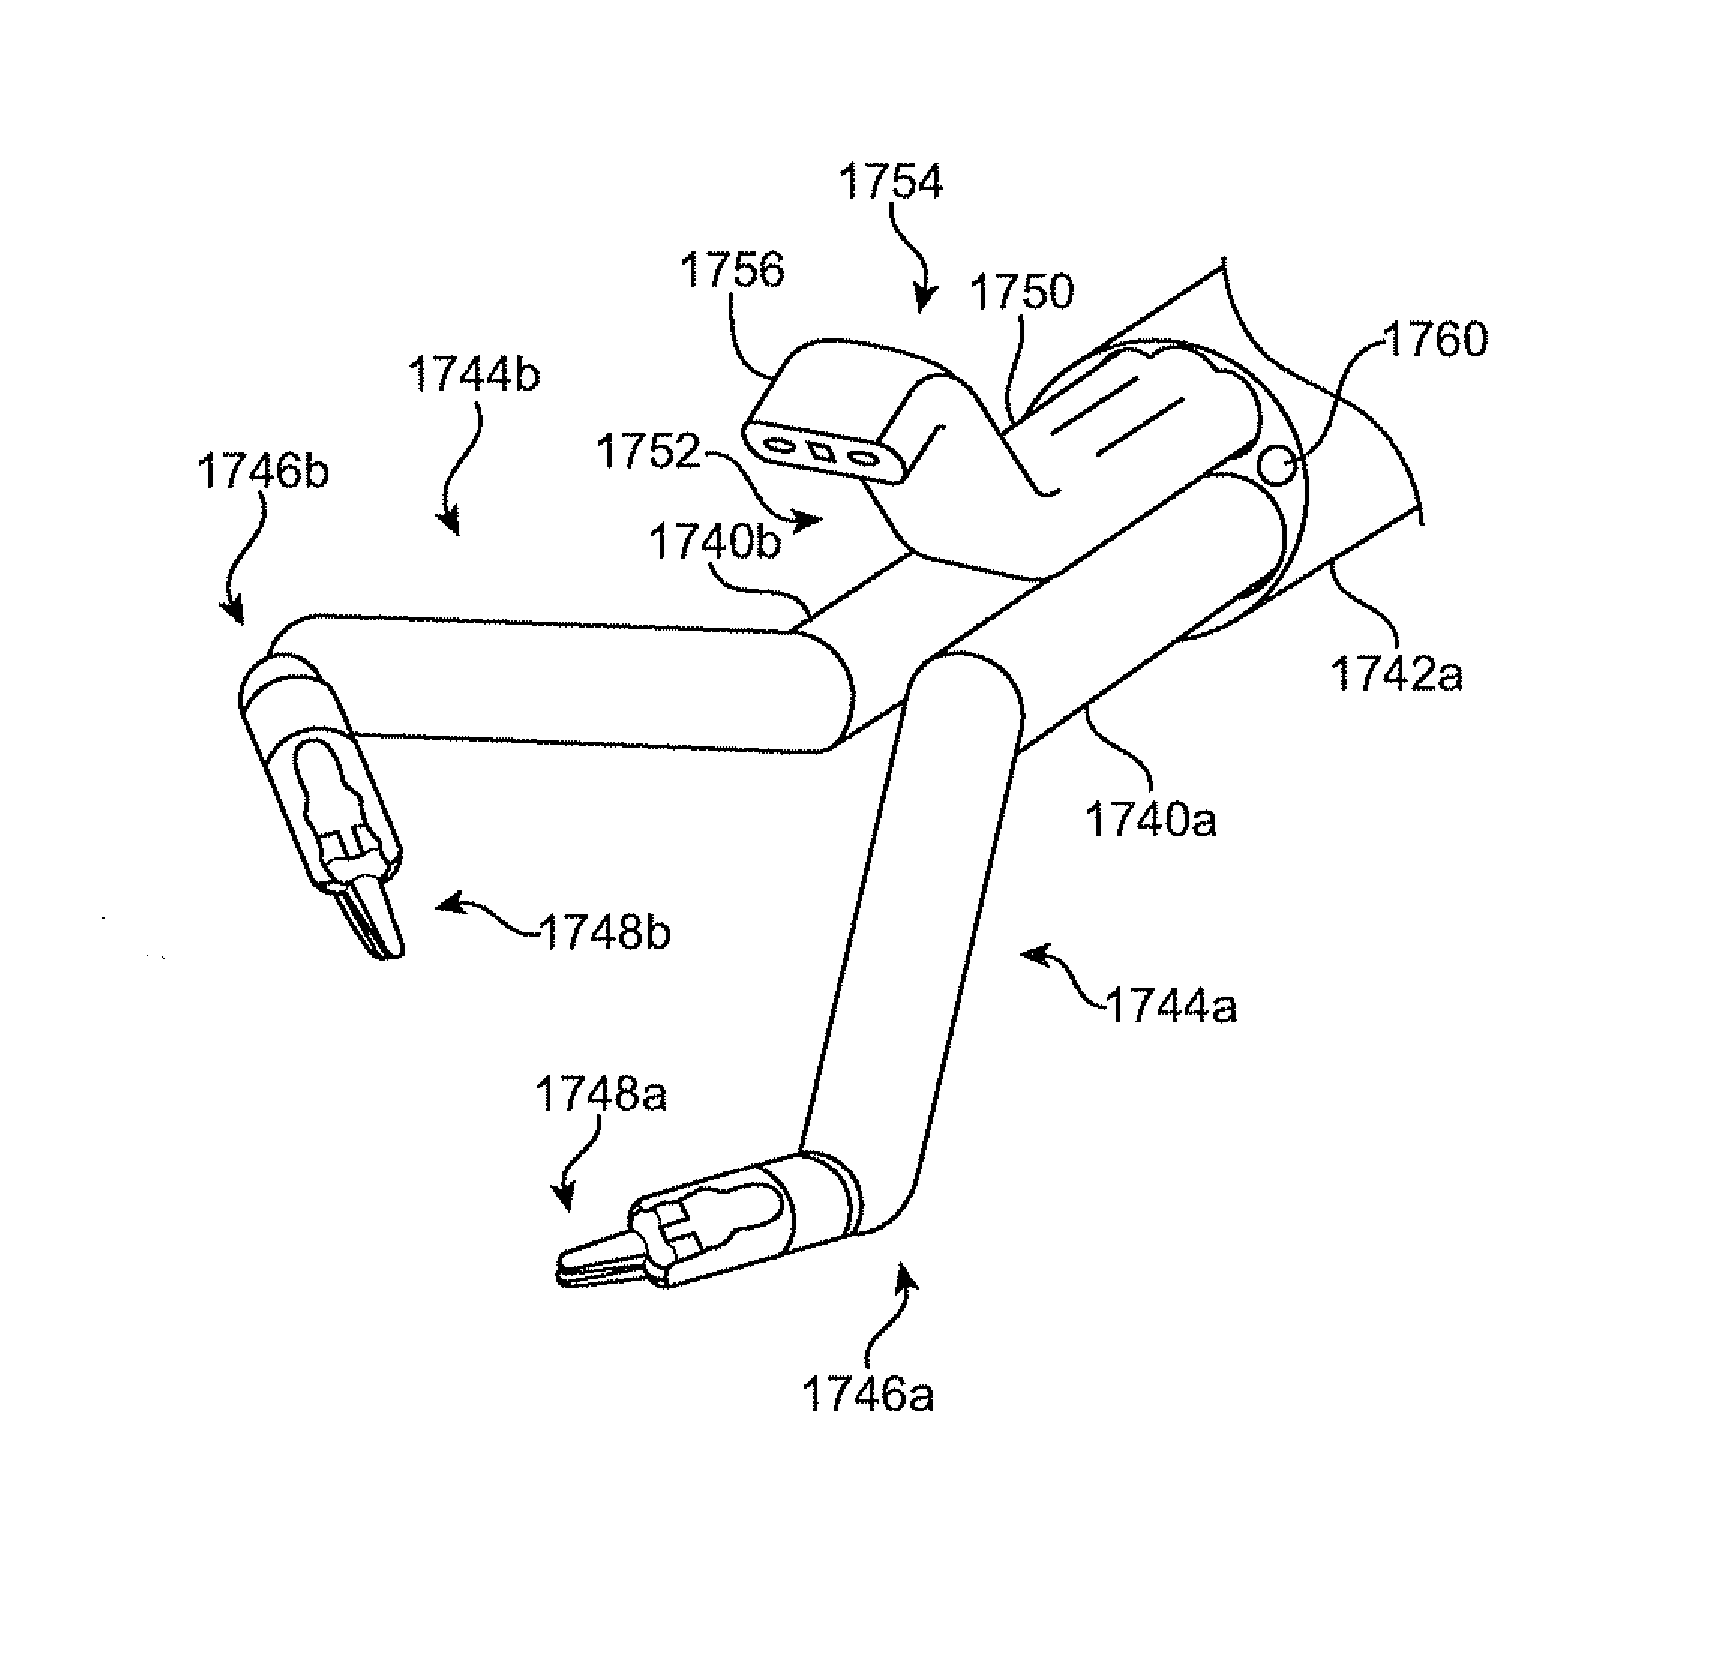 Side looking minimally invasive surgery instrument assembly